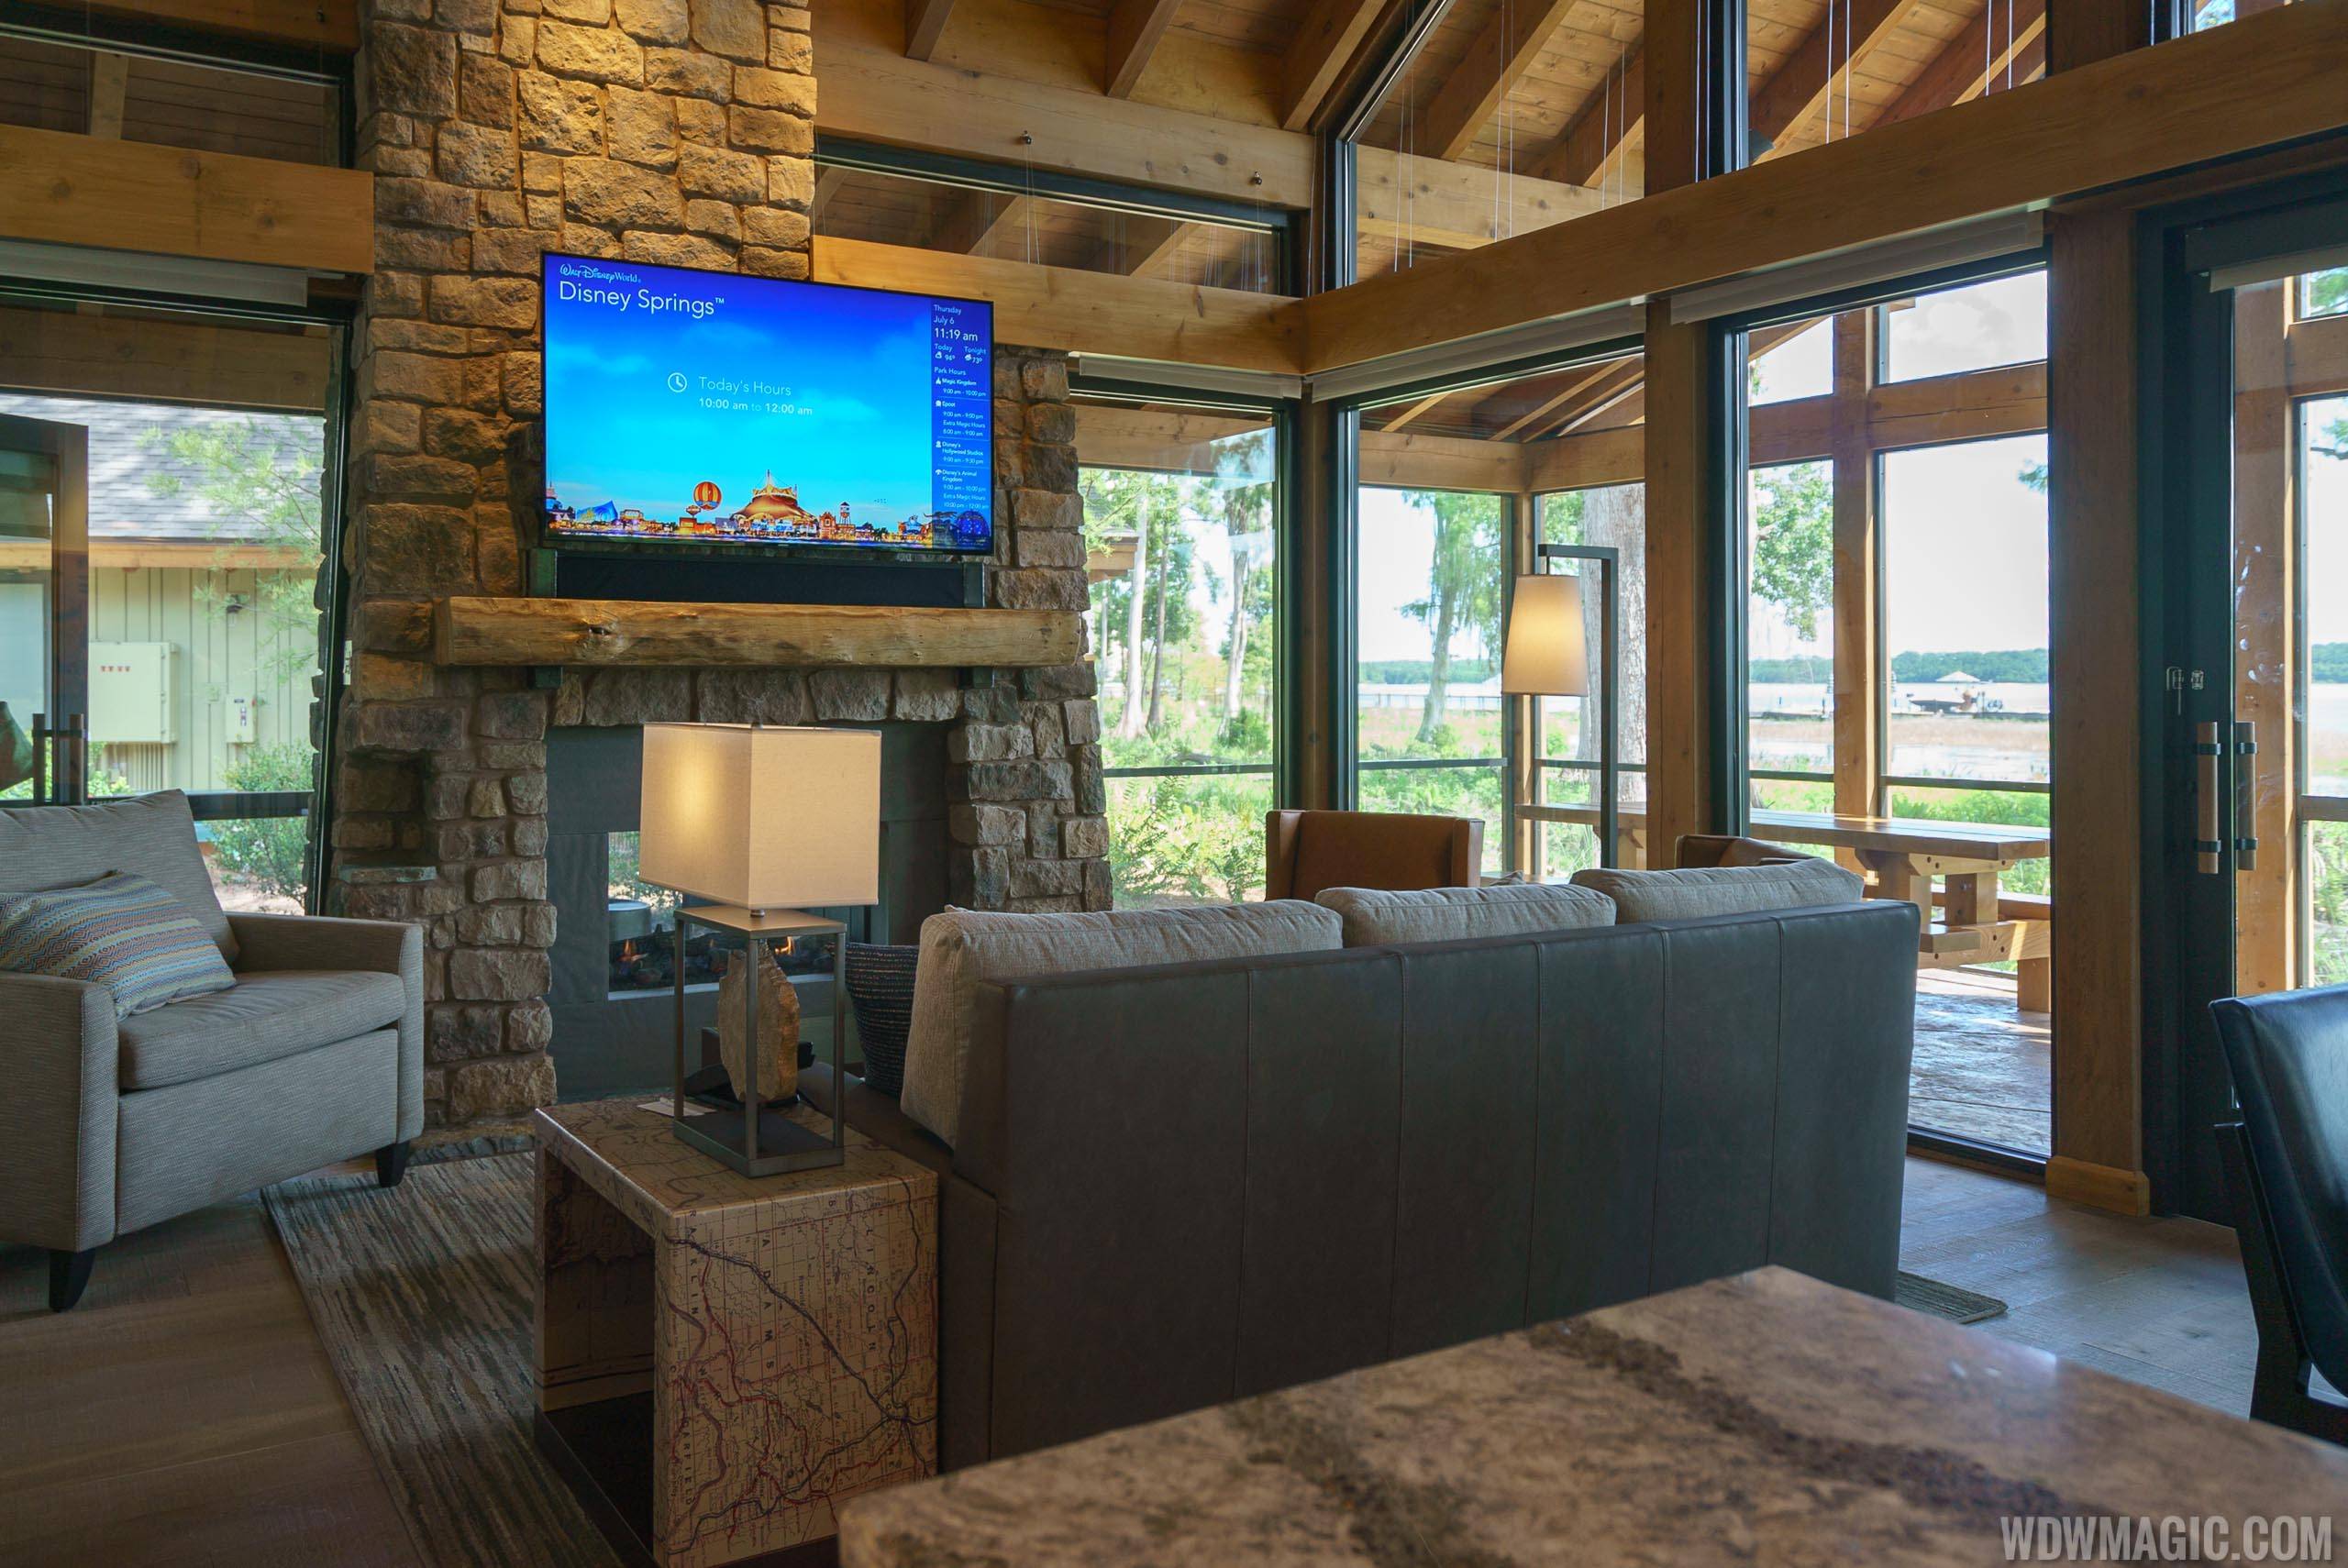 You could gift someone a stay at Copper Creek Villas and Cabins at Disney's Wilderness Lodge